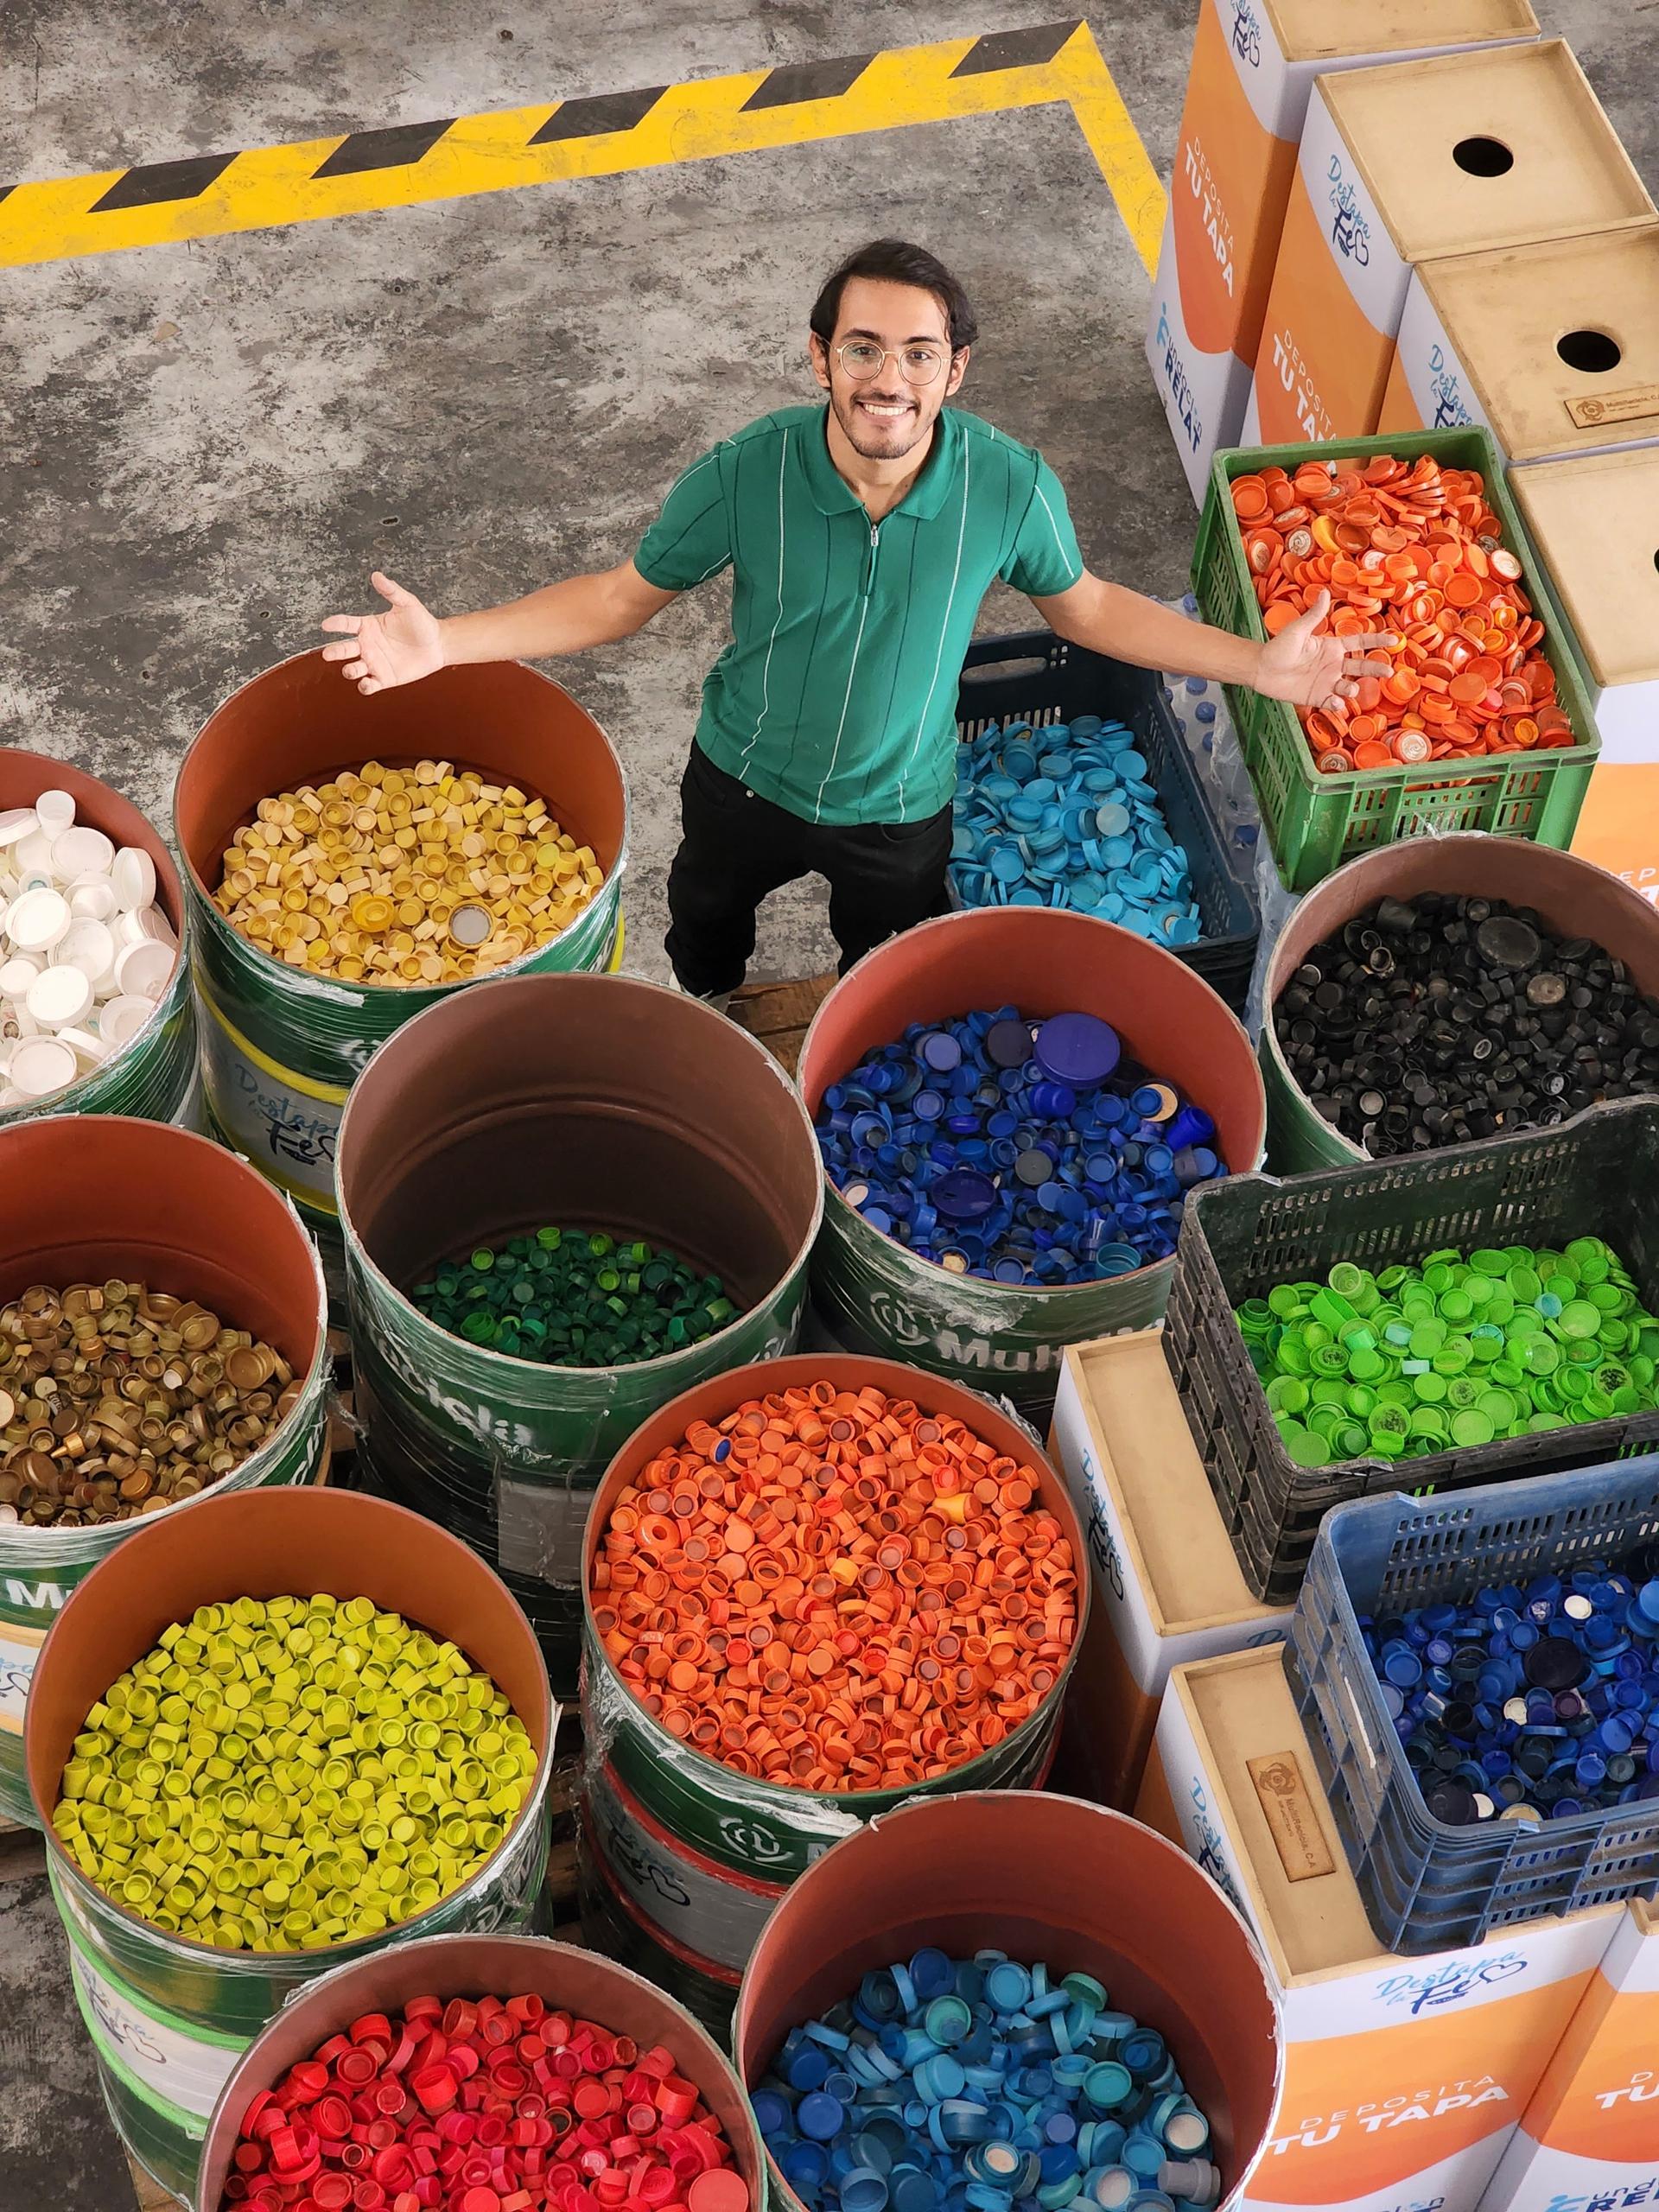 A man in a green shirt standing by bins of bottle caps separated by color